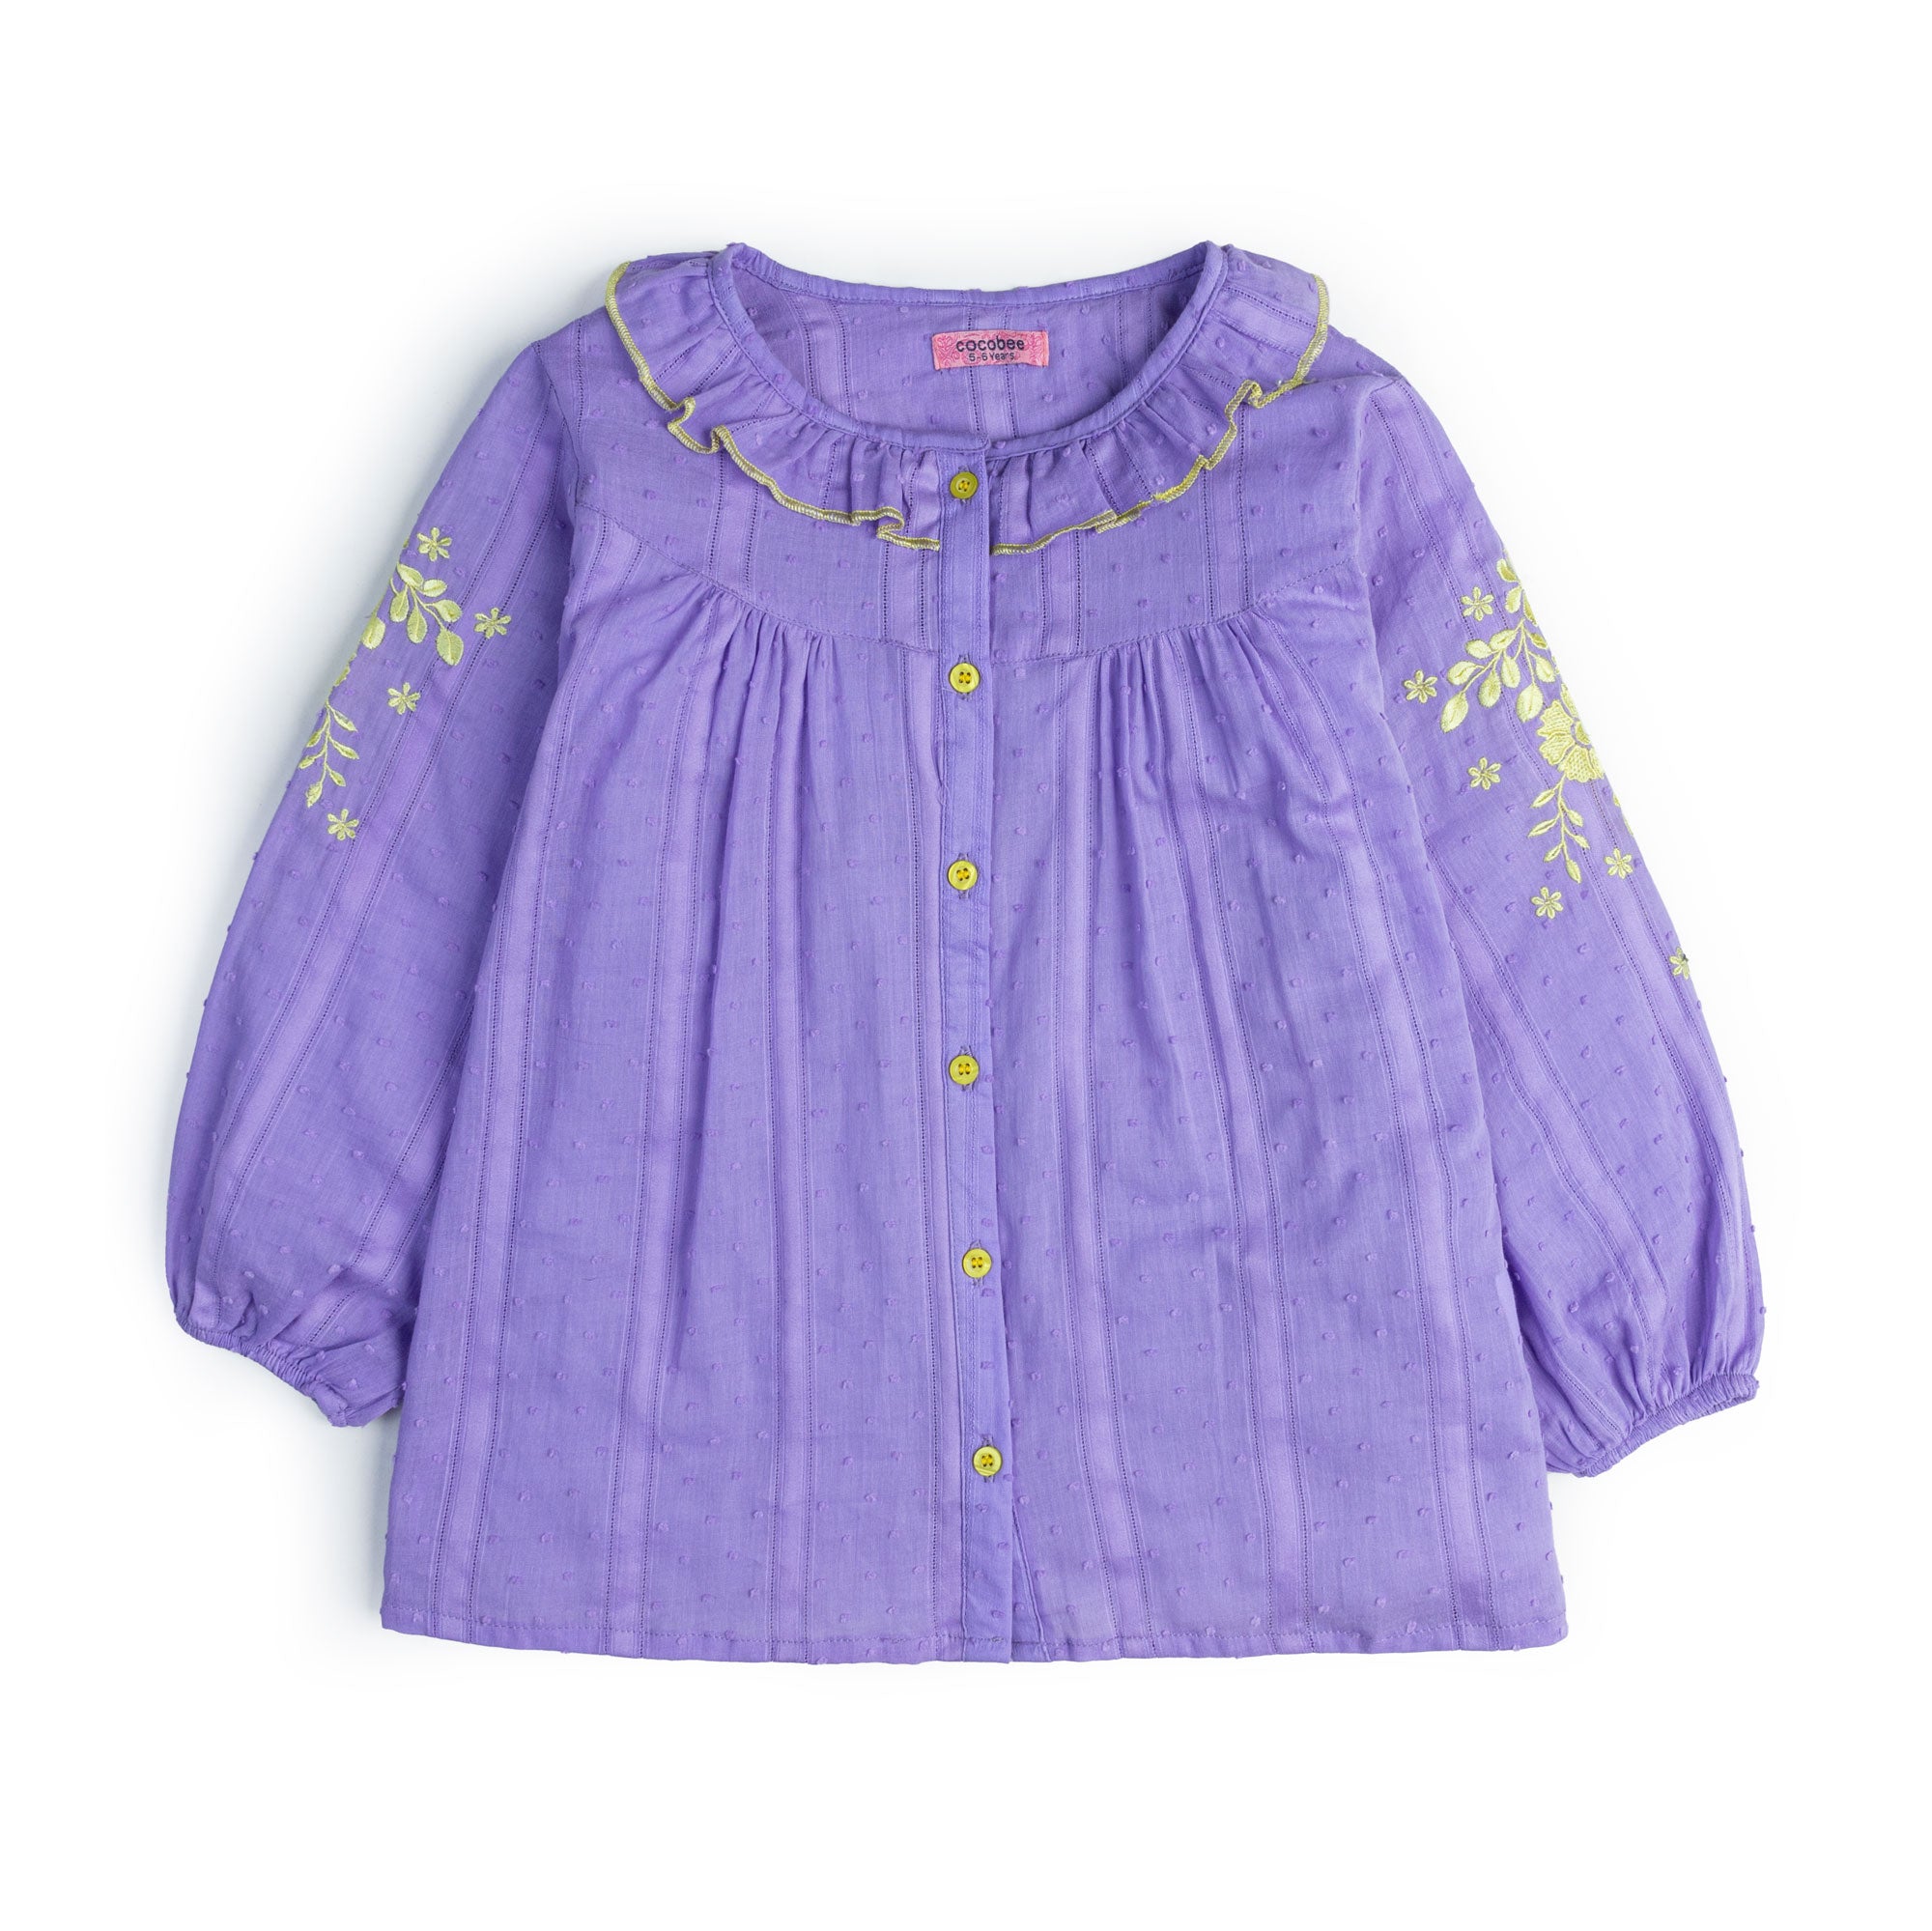 Ruffled Trim Embroidered Top